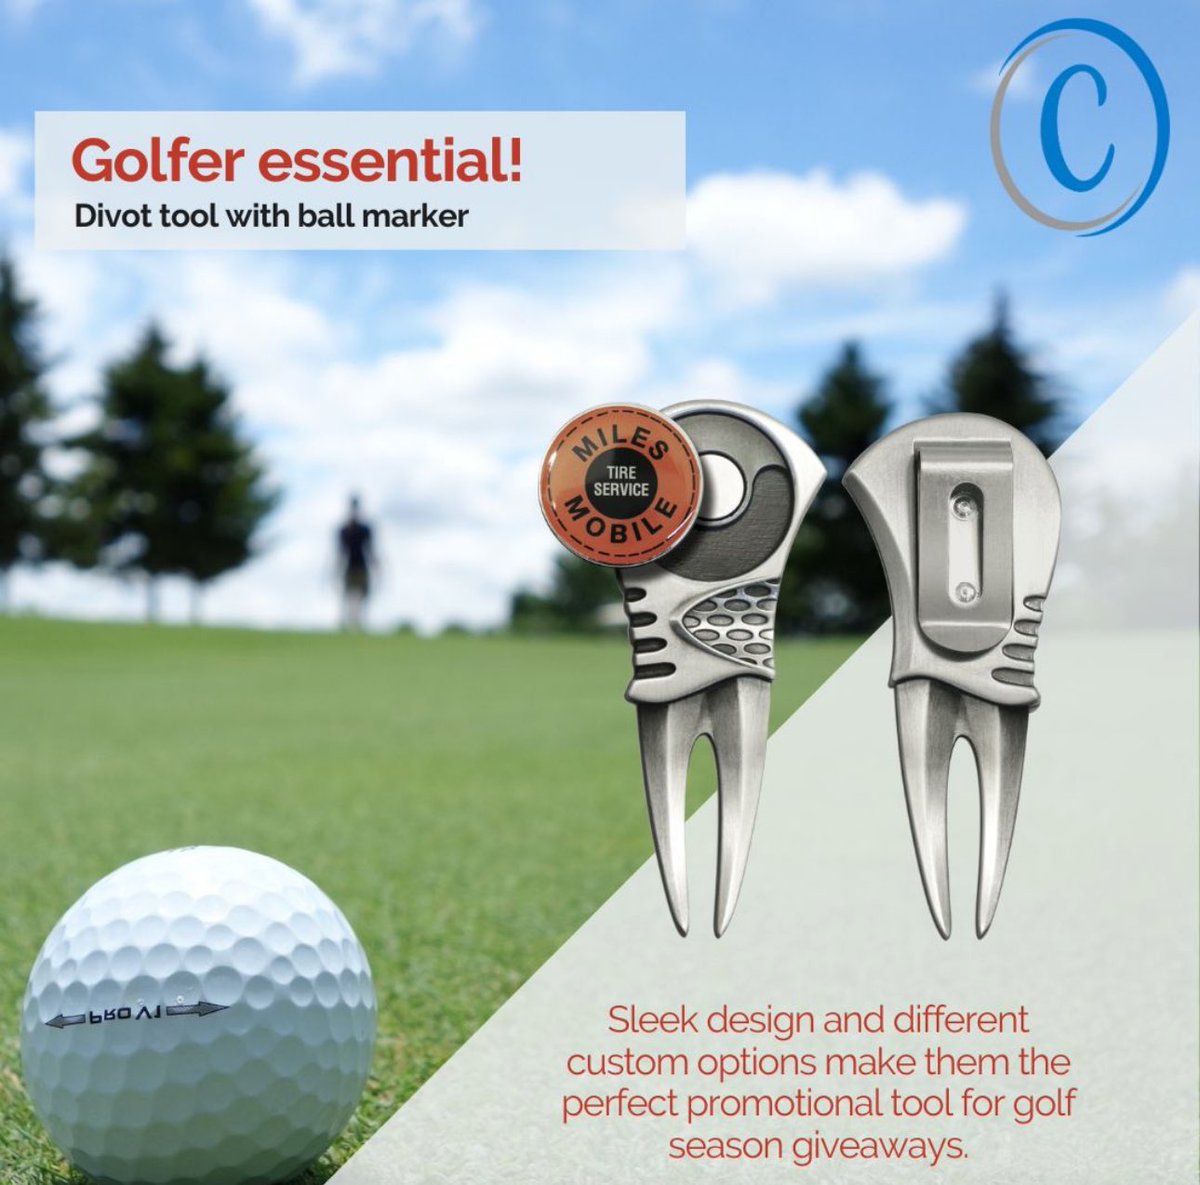 #Golf season giveaways made easy!  This divot tool with ball marker is a #golfer essential.  #ContactUs today for a #quote with your #companylogo! 
.
.
#businessbranding #yourlogohere #eventmarketing #swag #giveaways #promotionalproducts #promotionalmarketing #golfseason